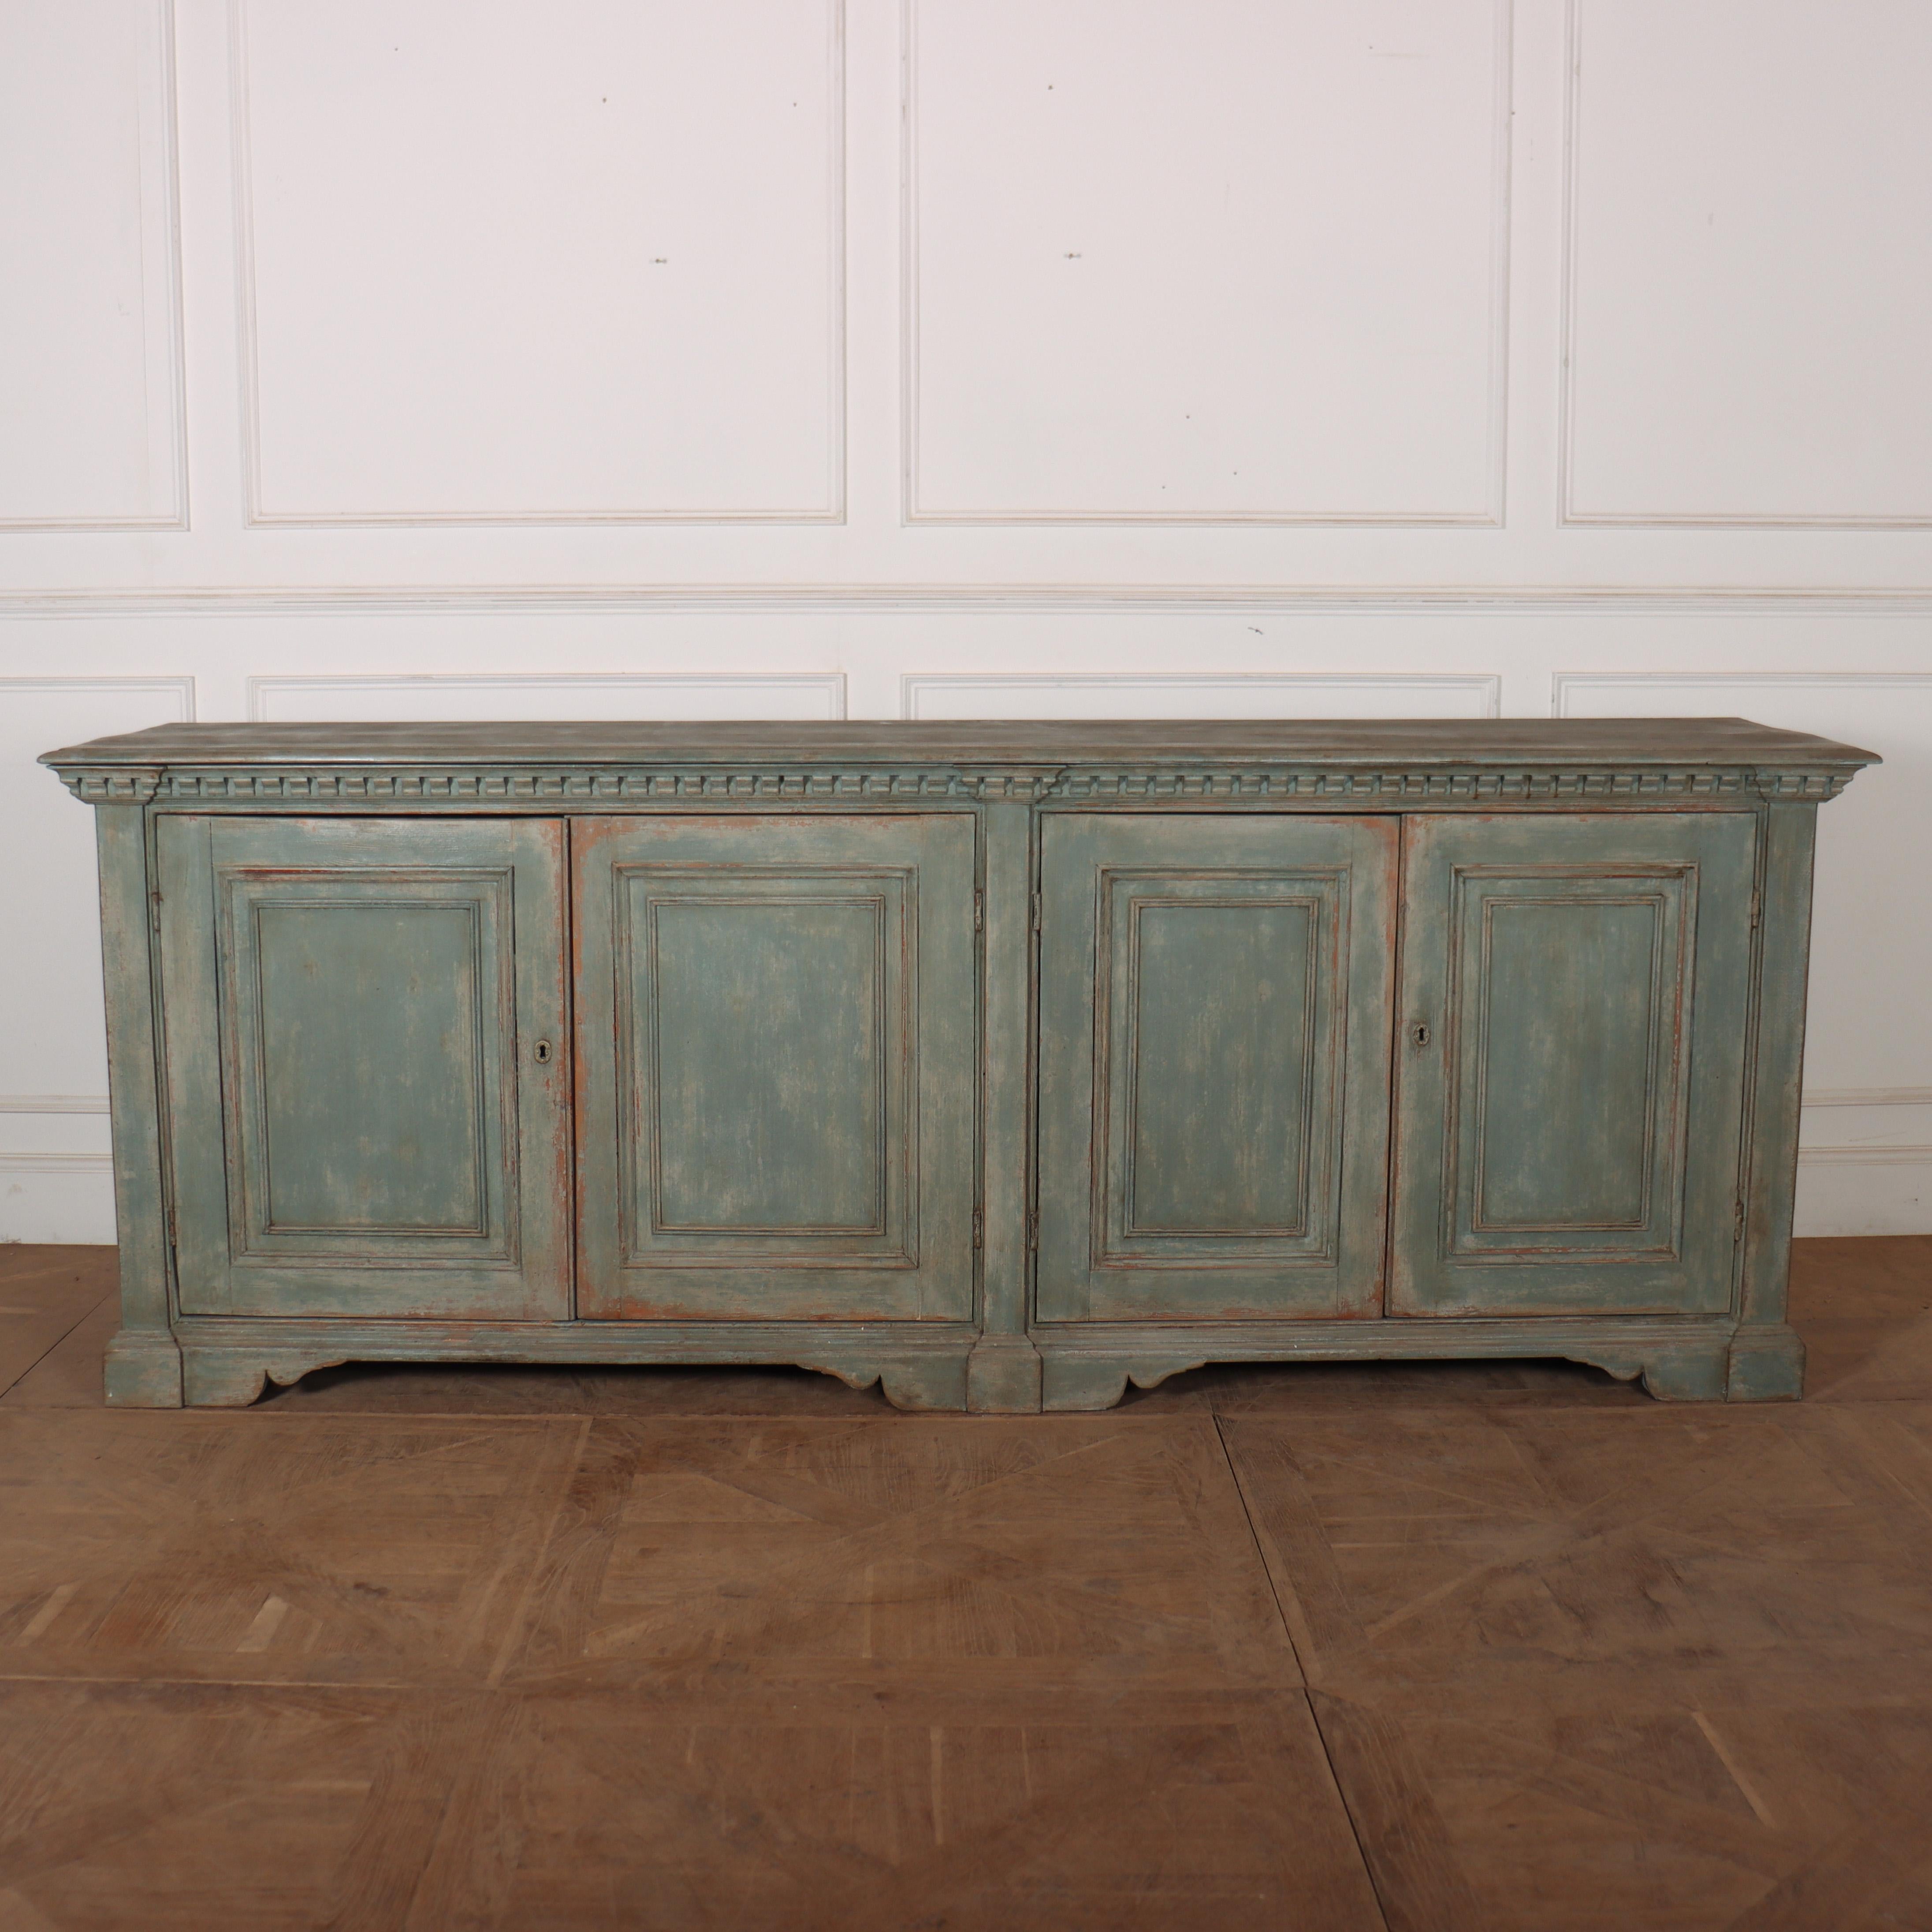 Large early 19th C painted Italian 4 door enfilade. 1810

Reference: 8338

Dimensions
104 inches (264 cms) Wide
22.5 inches (57 cms) Deep
39 inches (99 cms) High